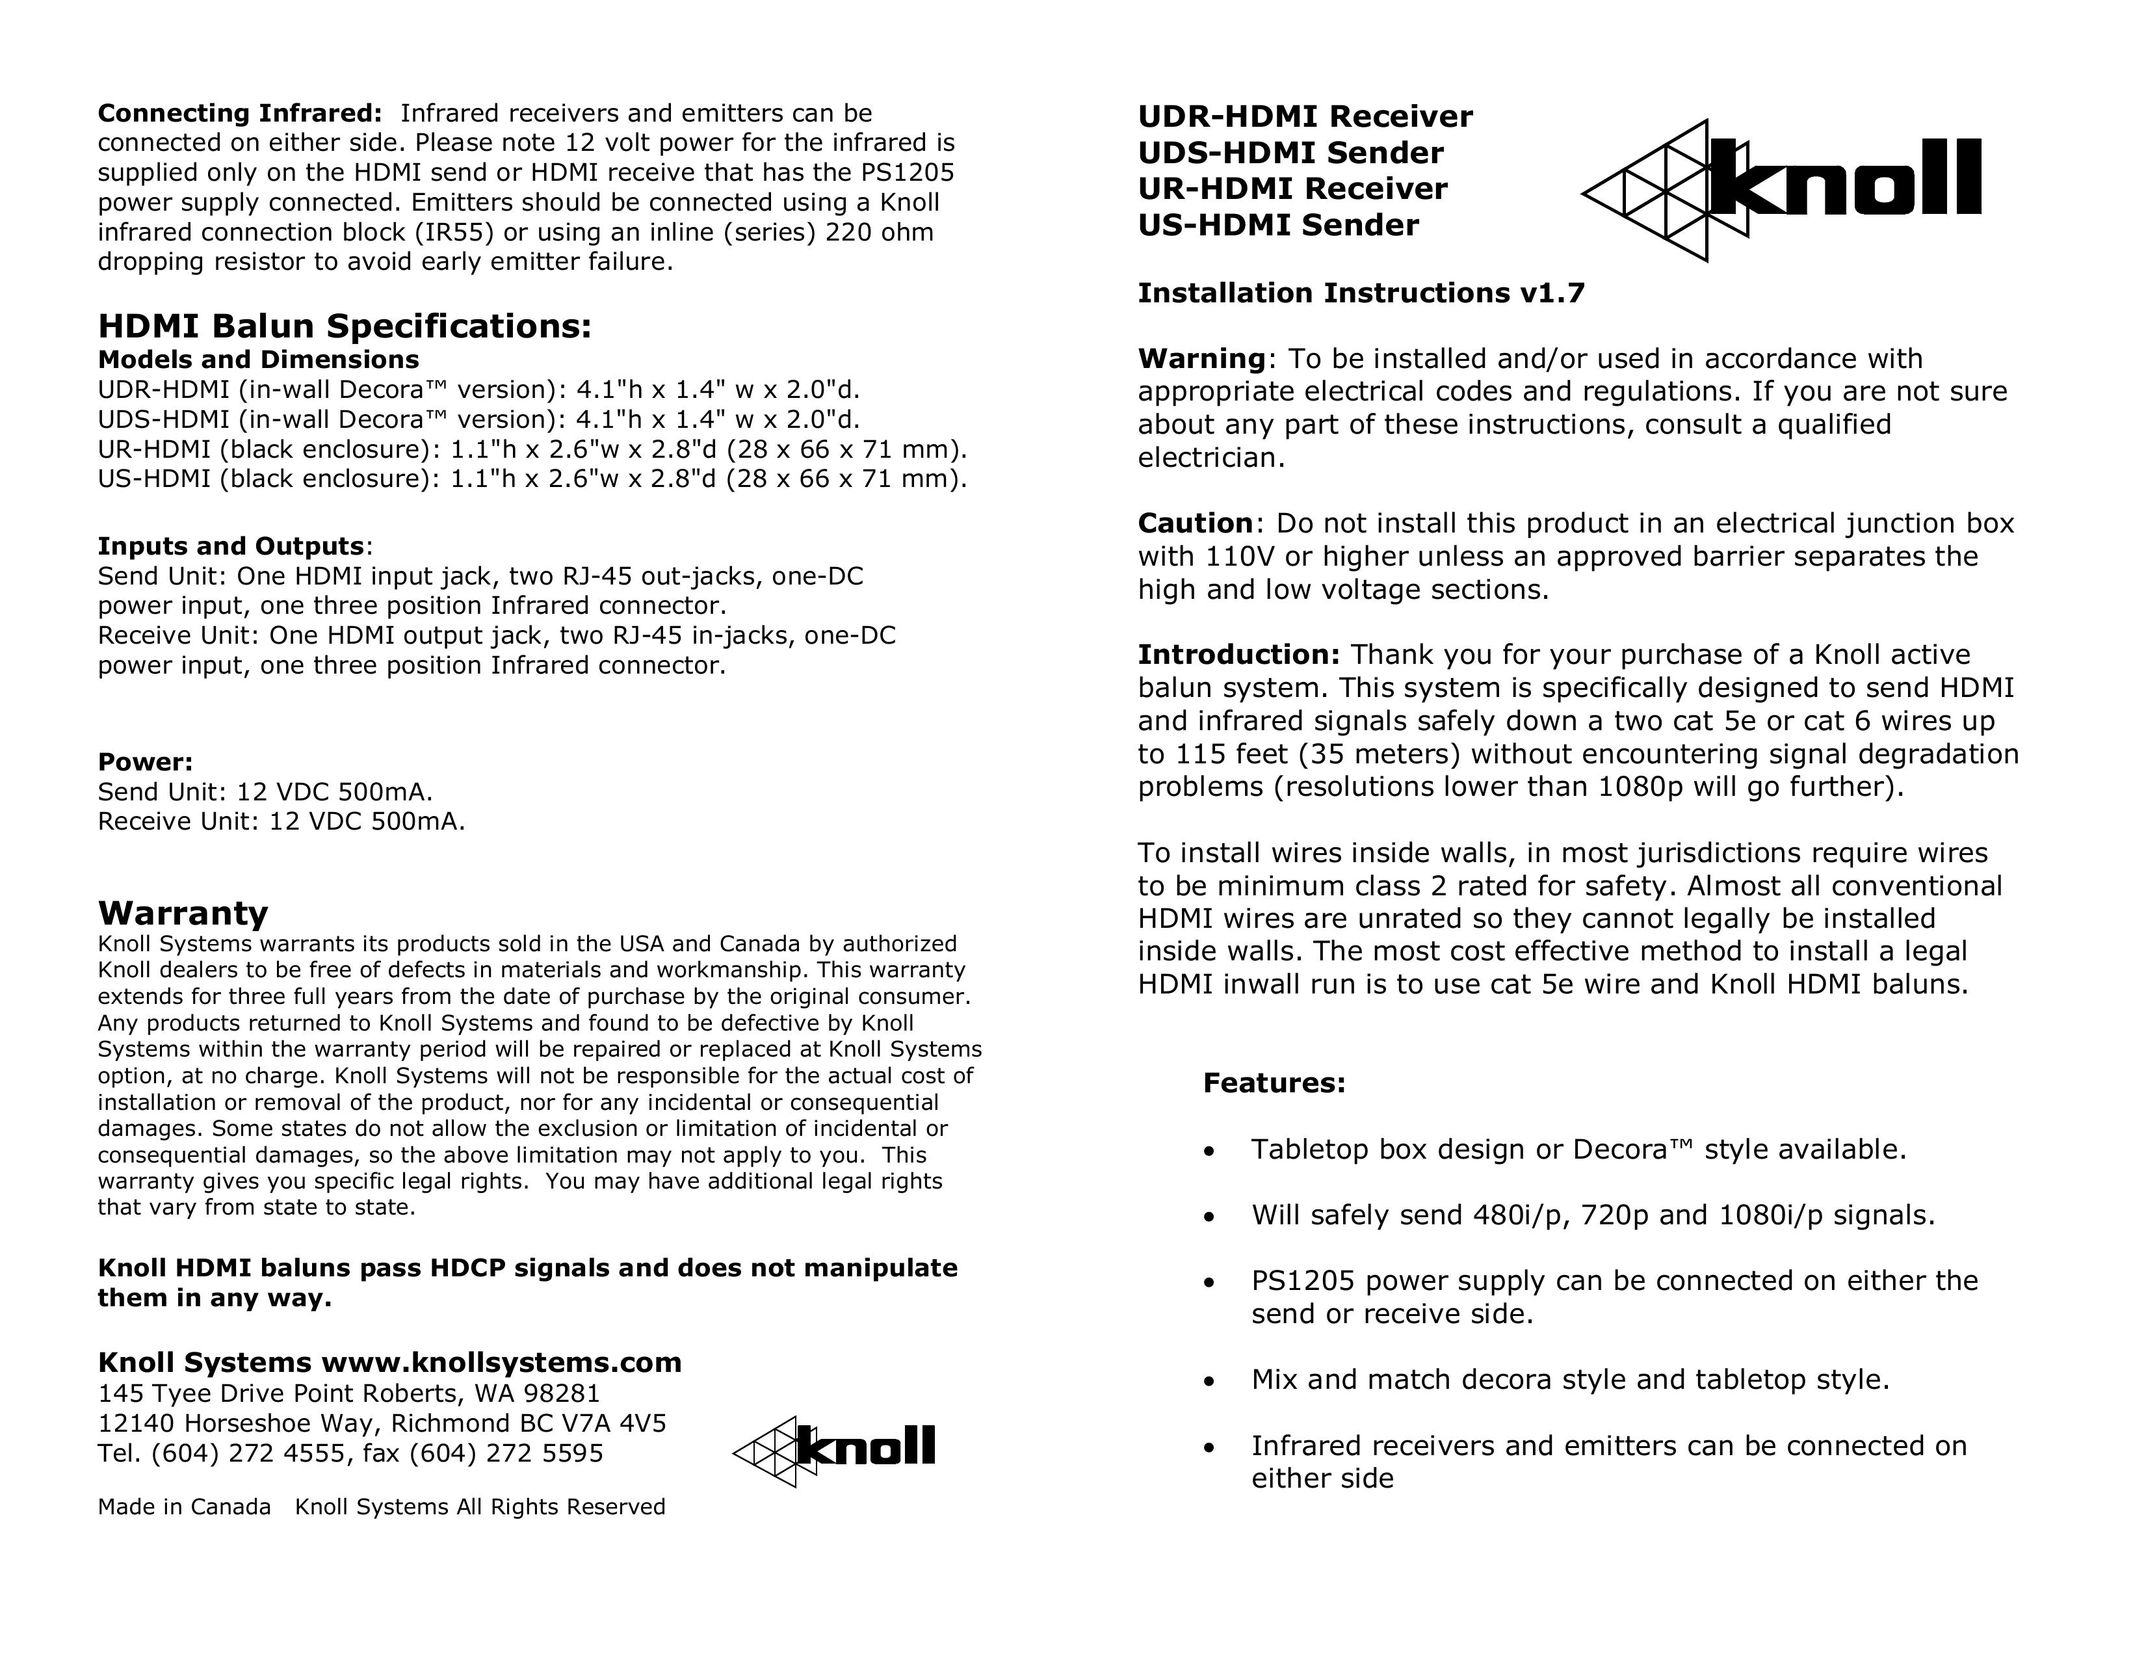 Knoll Systems UR-HDMI Projector User Manual